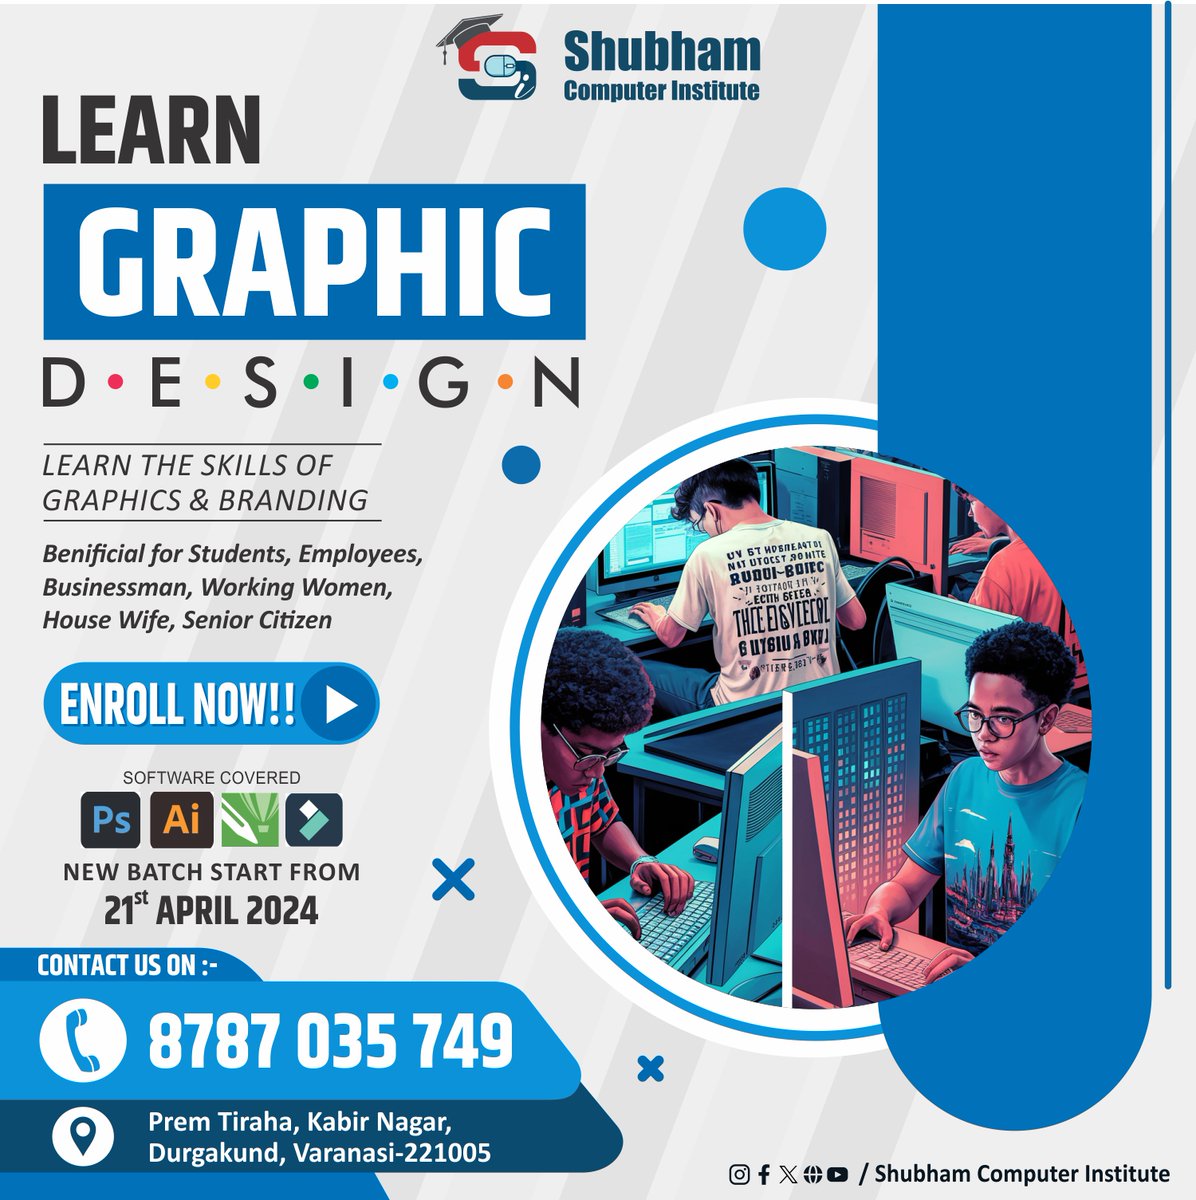 🎨 Unlock Your Creative Potential! Join Our Graphic Design Course in Varanasi Today! 🖌️

#GraphicDesign #Varanasi #CreativeCourse #DigitalSkills #LearnDesign #GraphicDesignVaranasi #DesignSchool #ArtisticExpression #CreativeCareer #EnrollNow